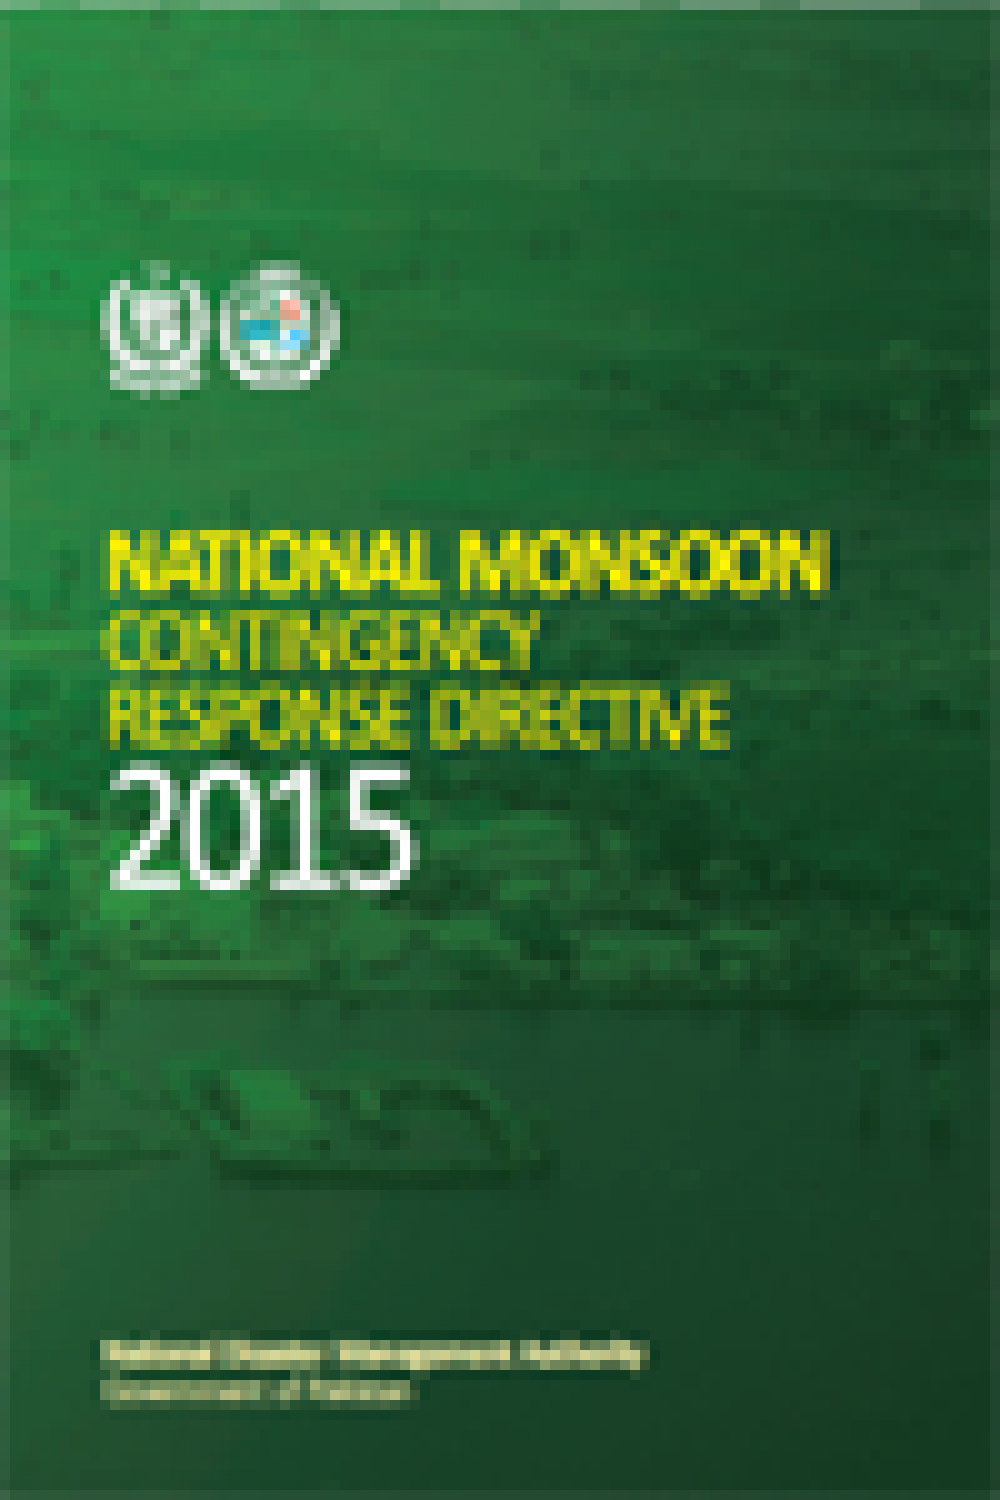 National Monsoon Contingency Response Directive 2015